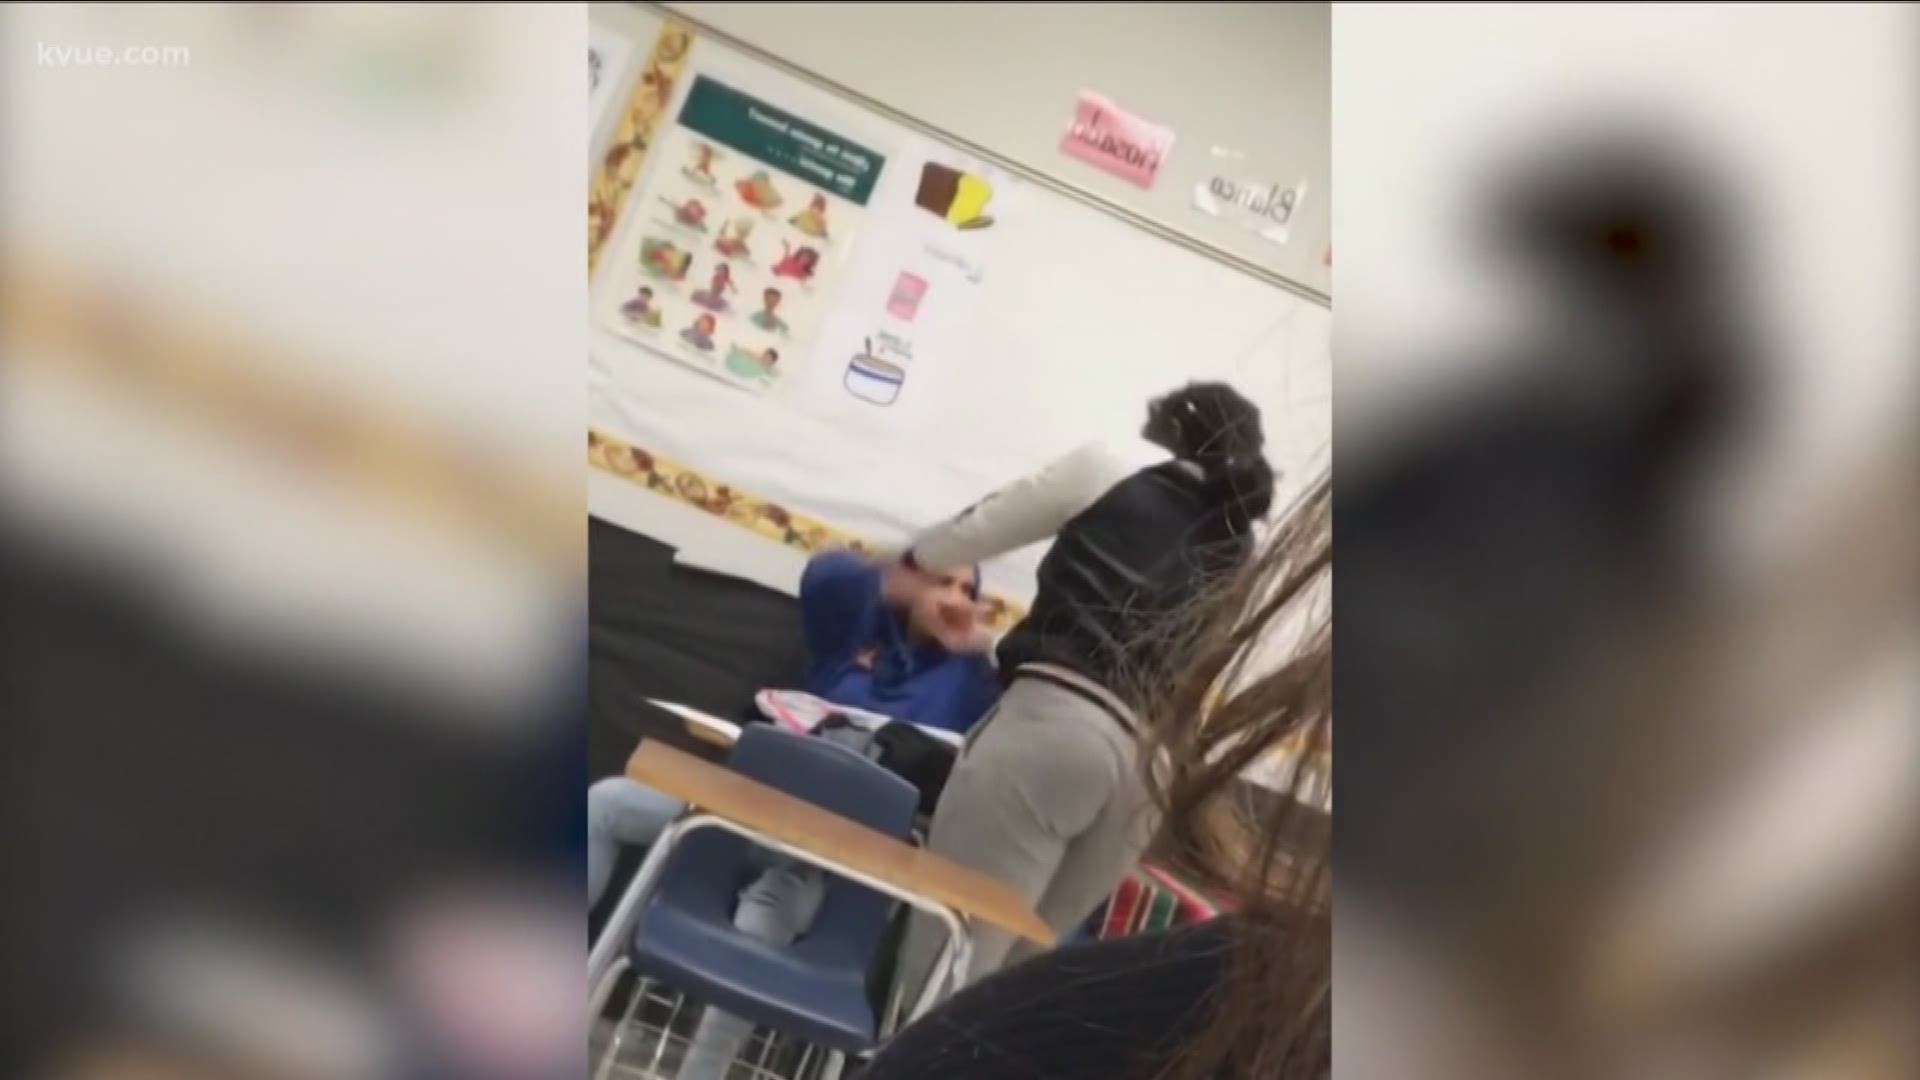 A Hays County teenager is still recovering after a substitute teacher is accused of brutally attacking her in a classroom.